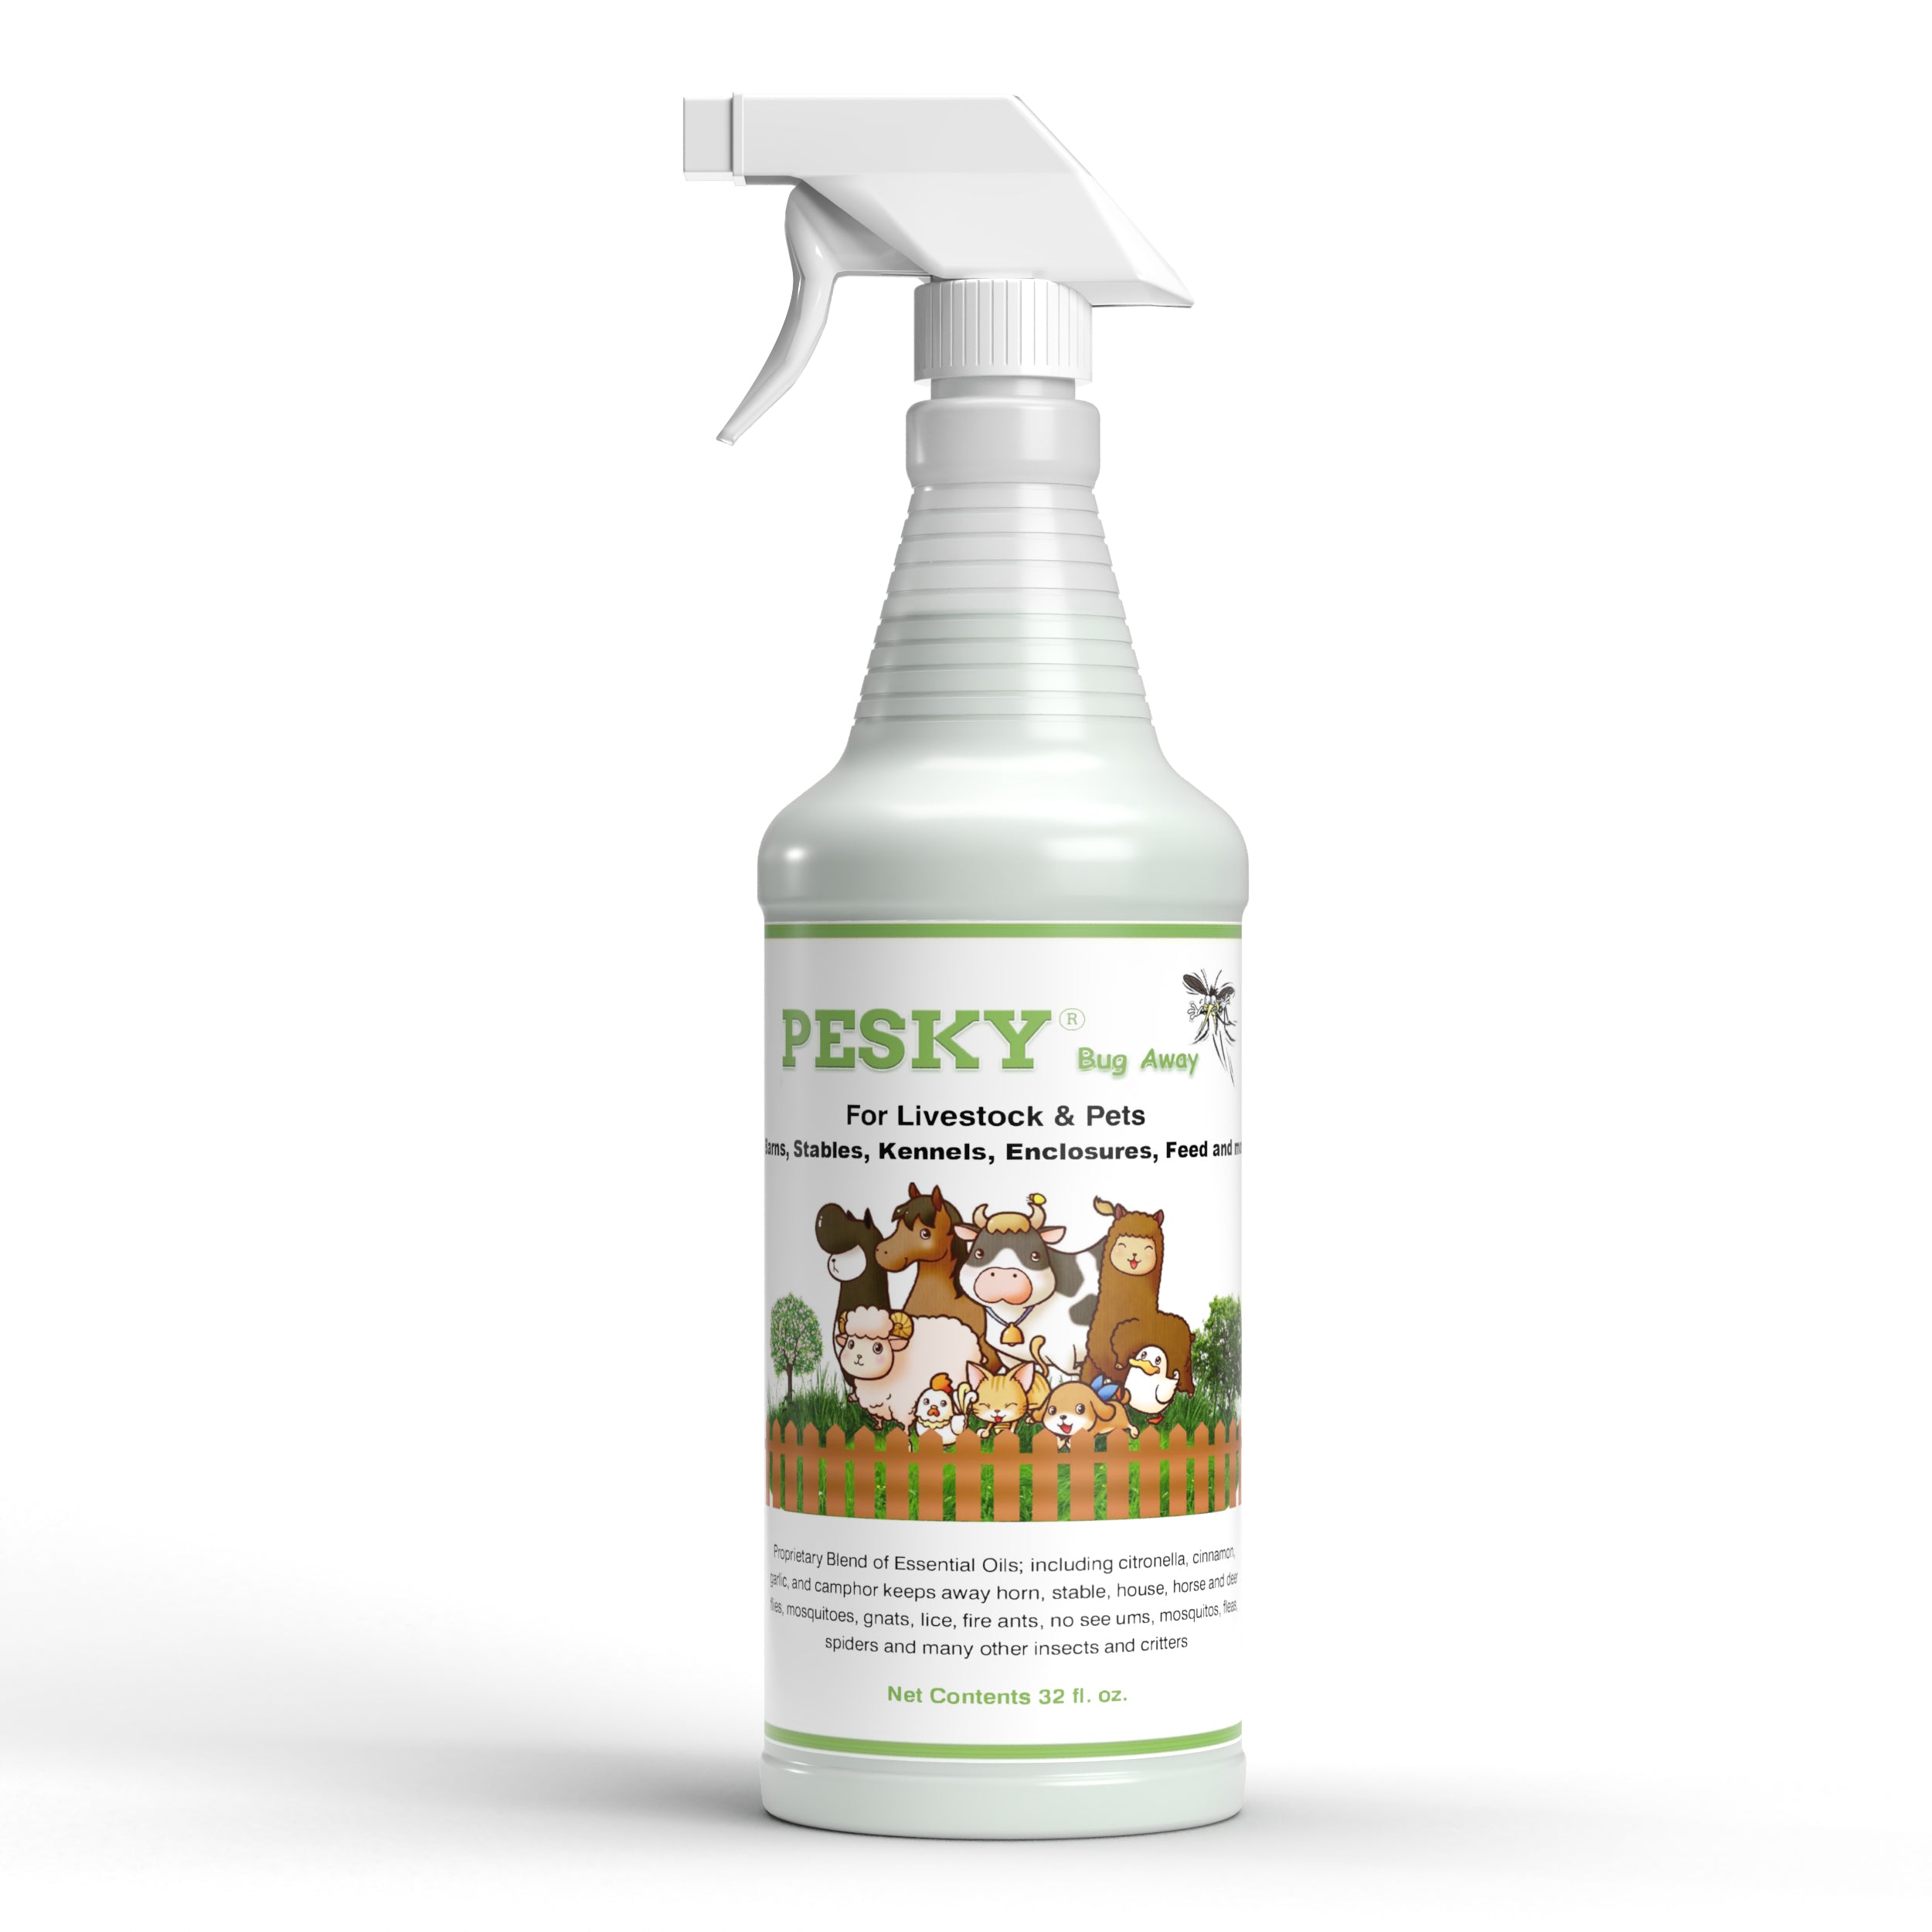 PESKY® Bug Away for Livestock & Pets - Kennels, Coops, Barns, Stables, Enclosures, Feed & More